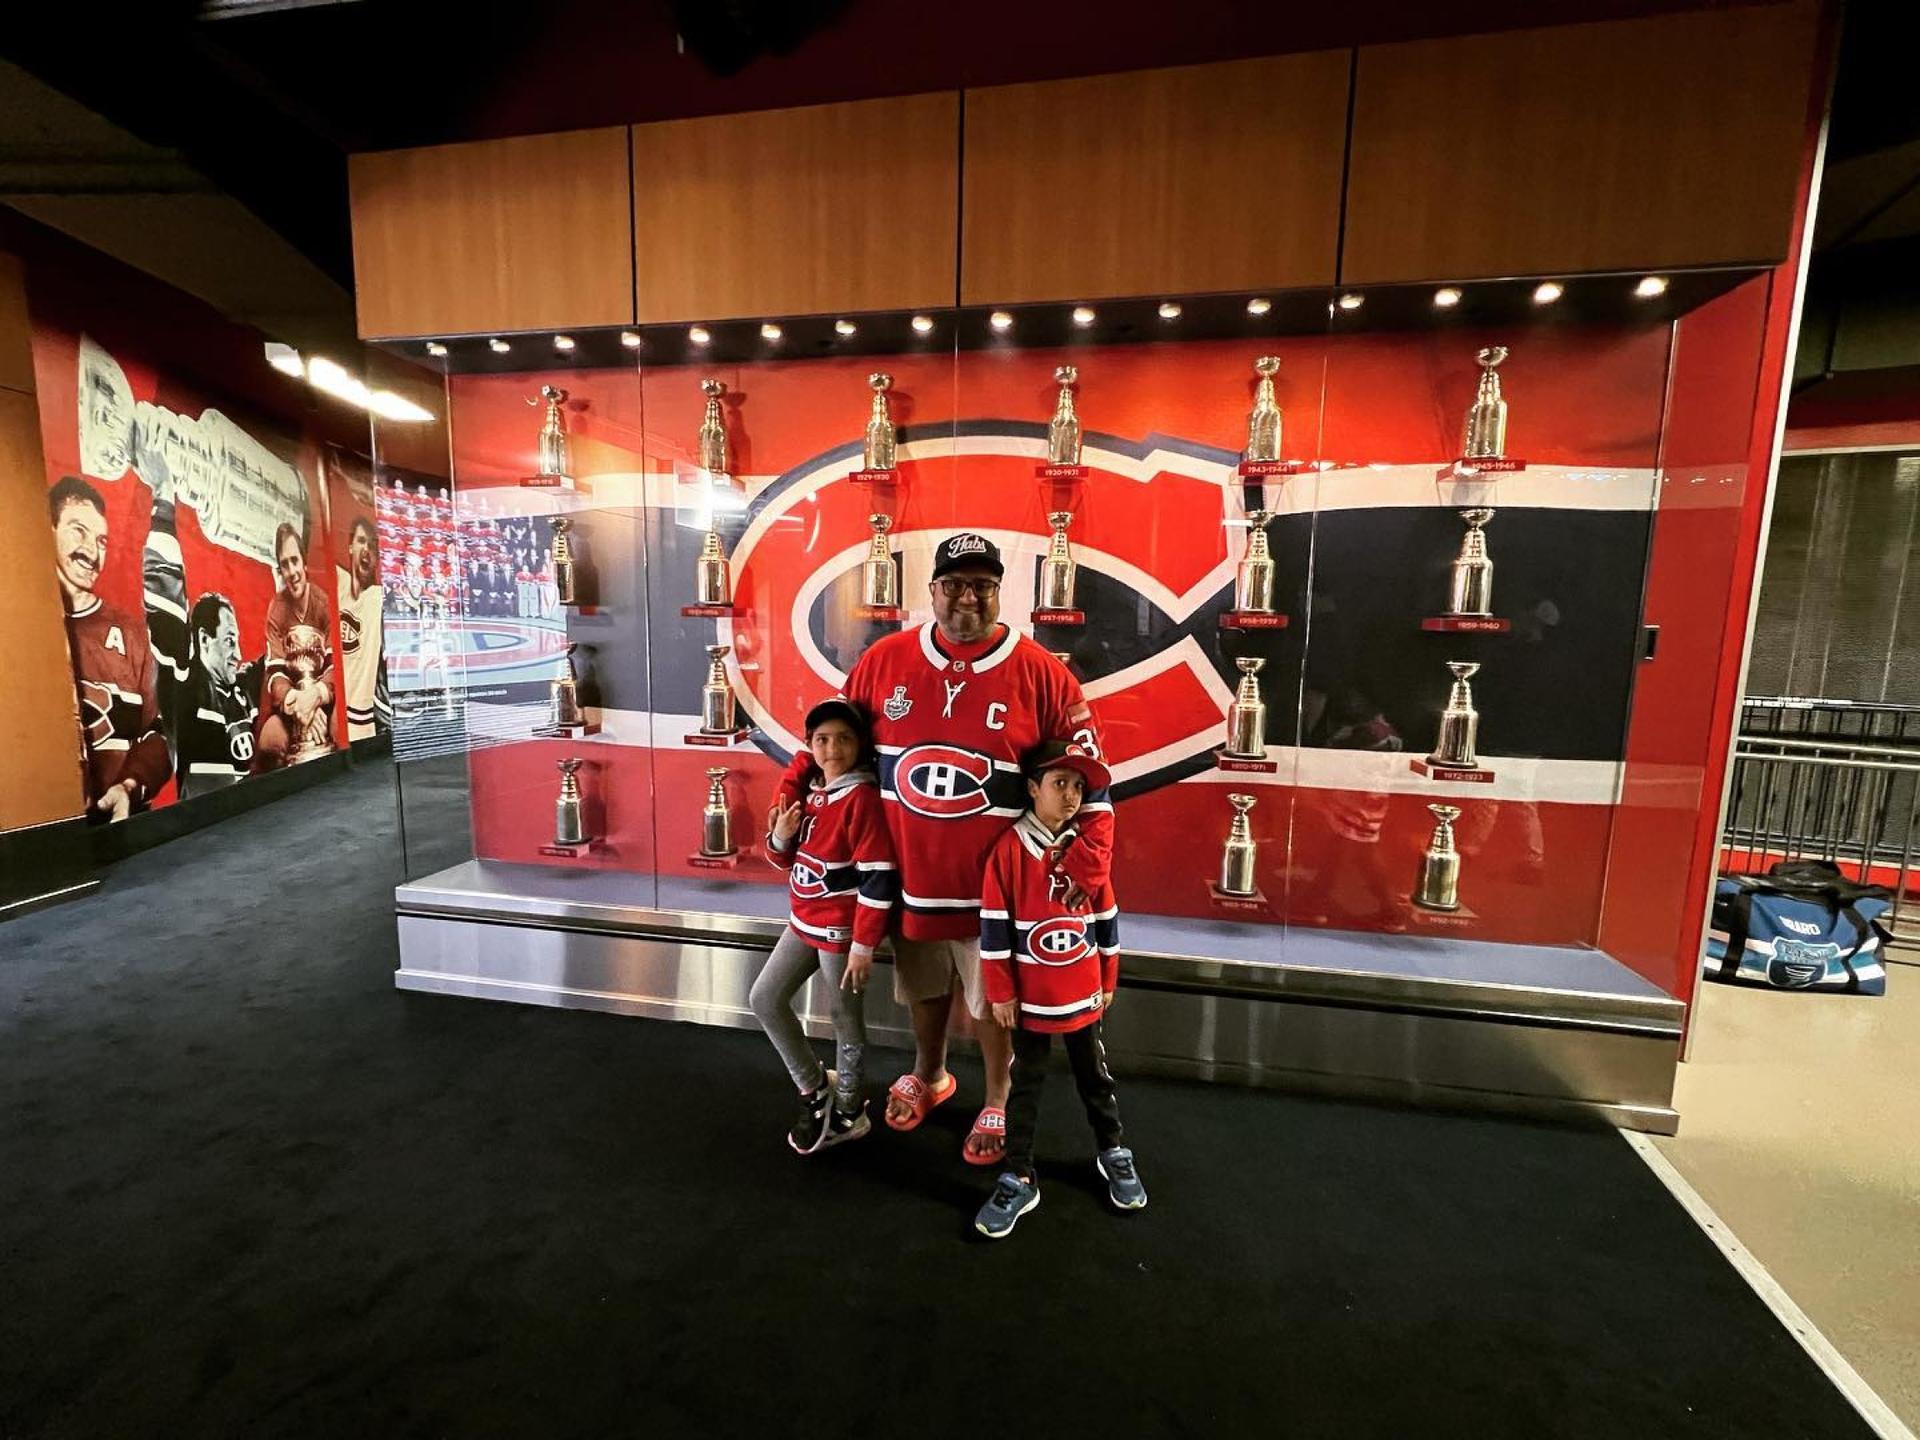 Montreal Canadiens superfan, Sunil Peetush, standing with his son and daughter in team jerseys in front of a trophy case